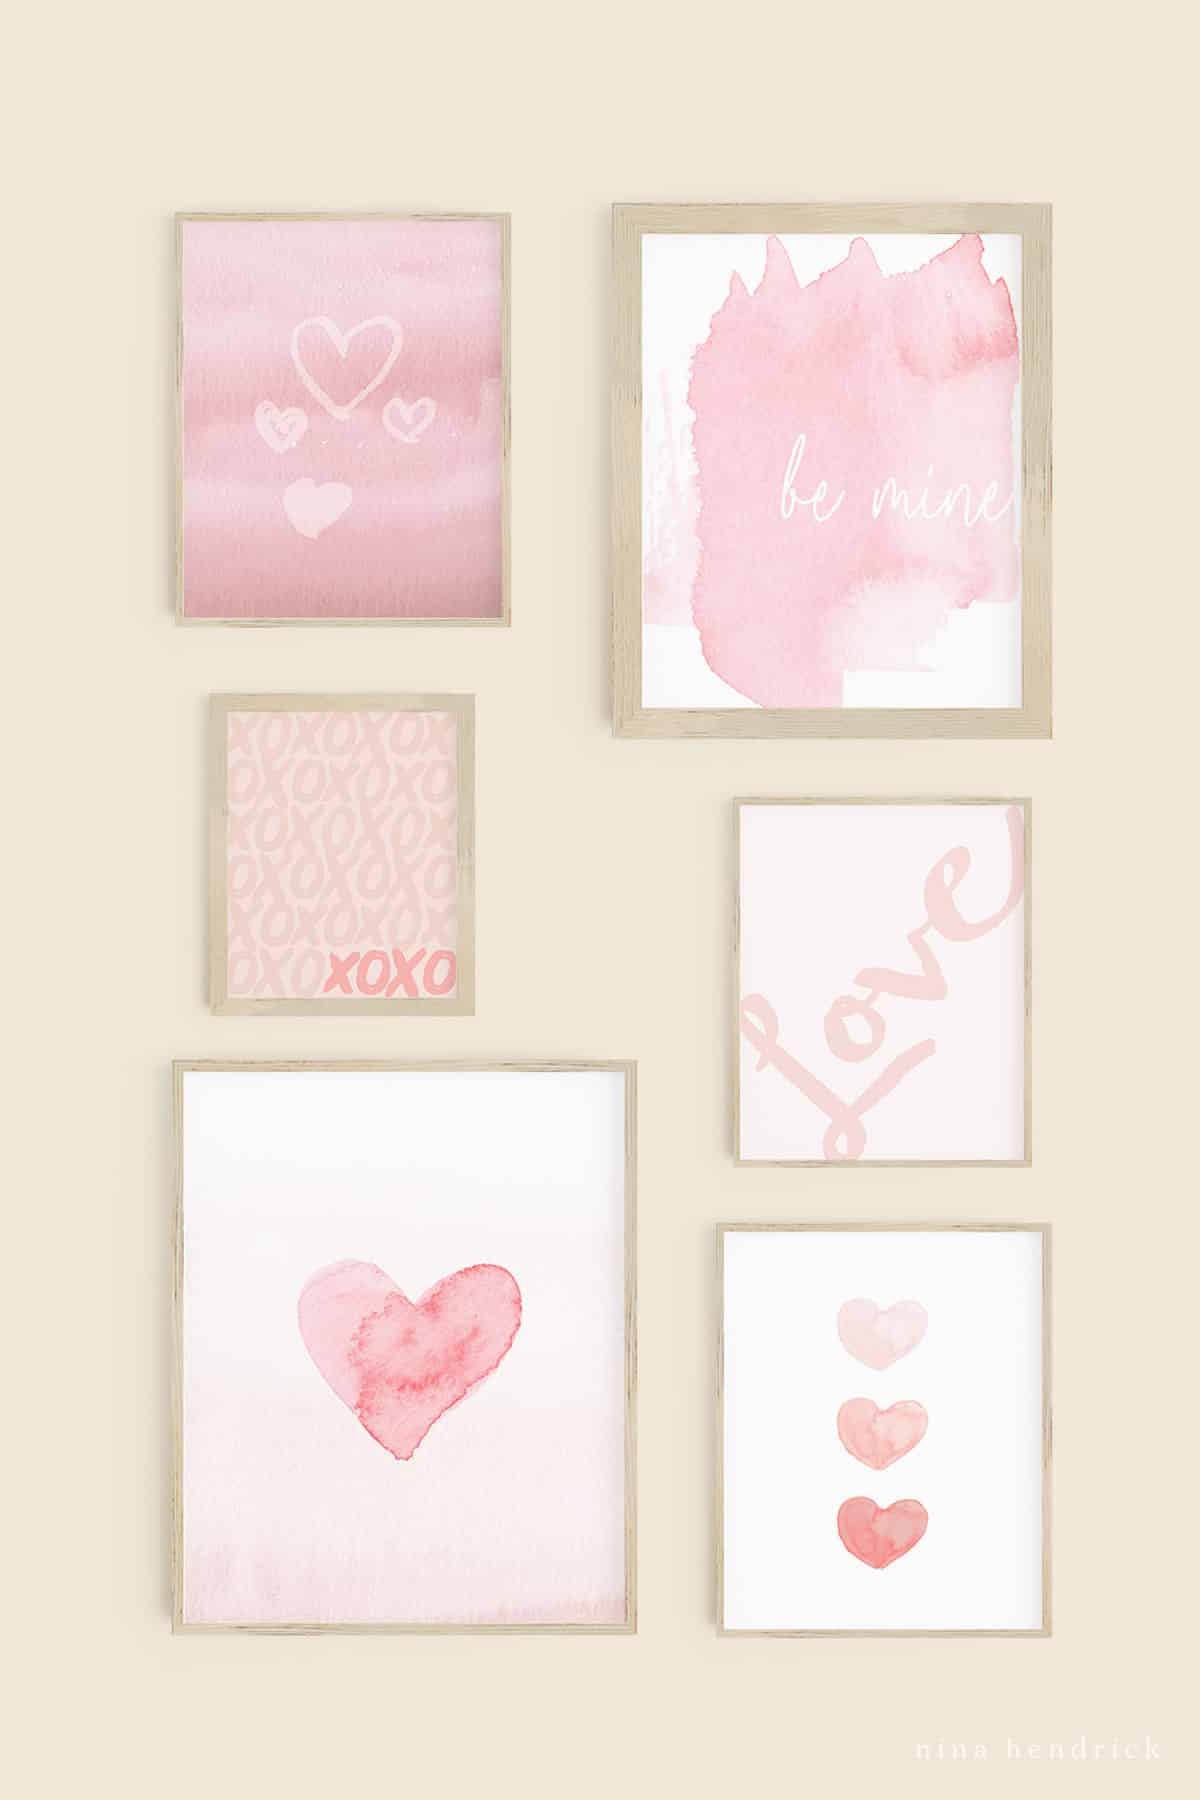 Free Printable Valentine's Day Gallery wall with hearts and other watercolor accents